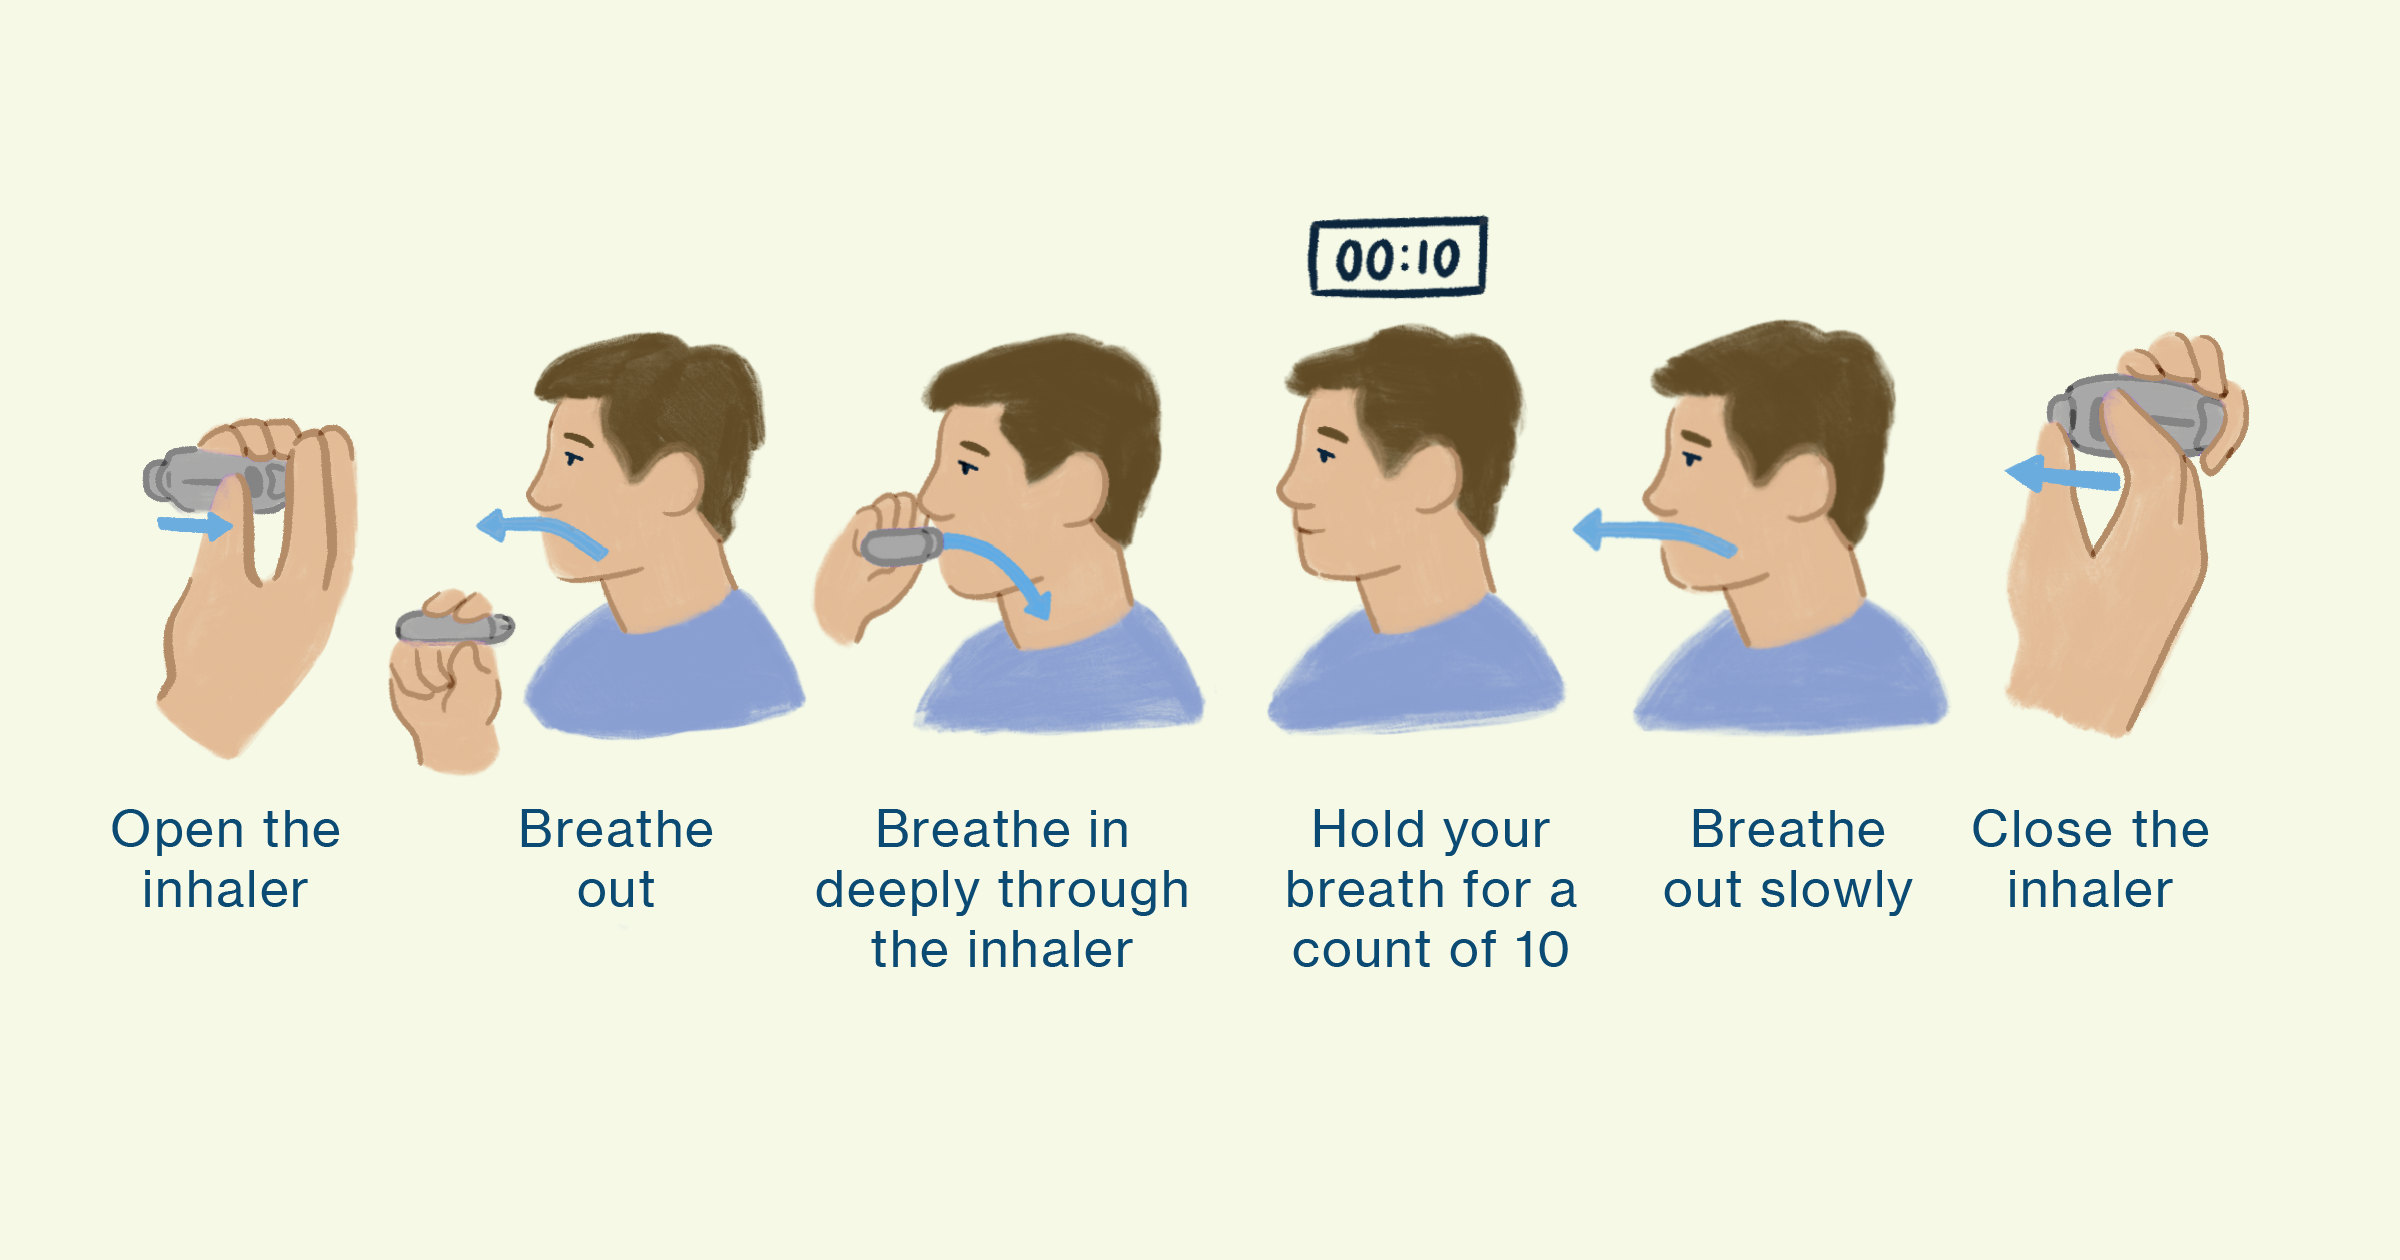 How to use a dry powder inhaler correctly